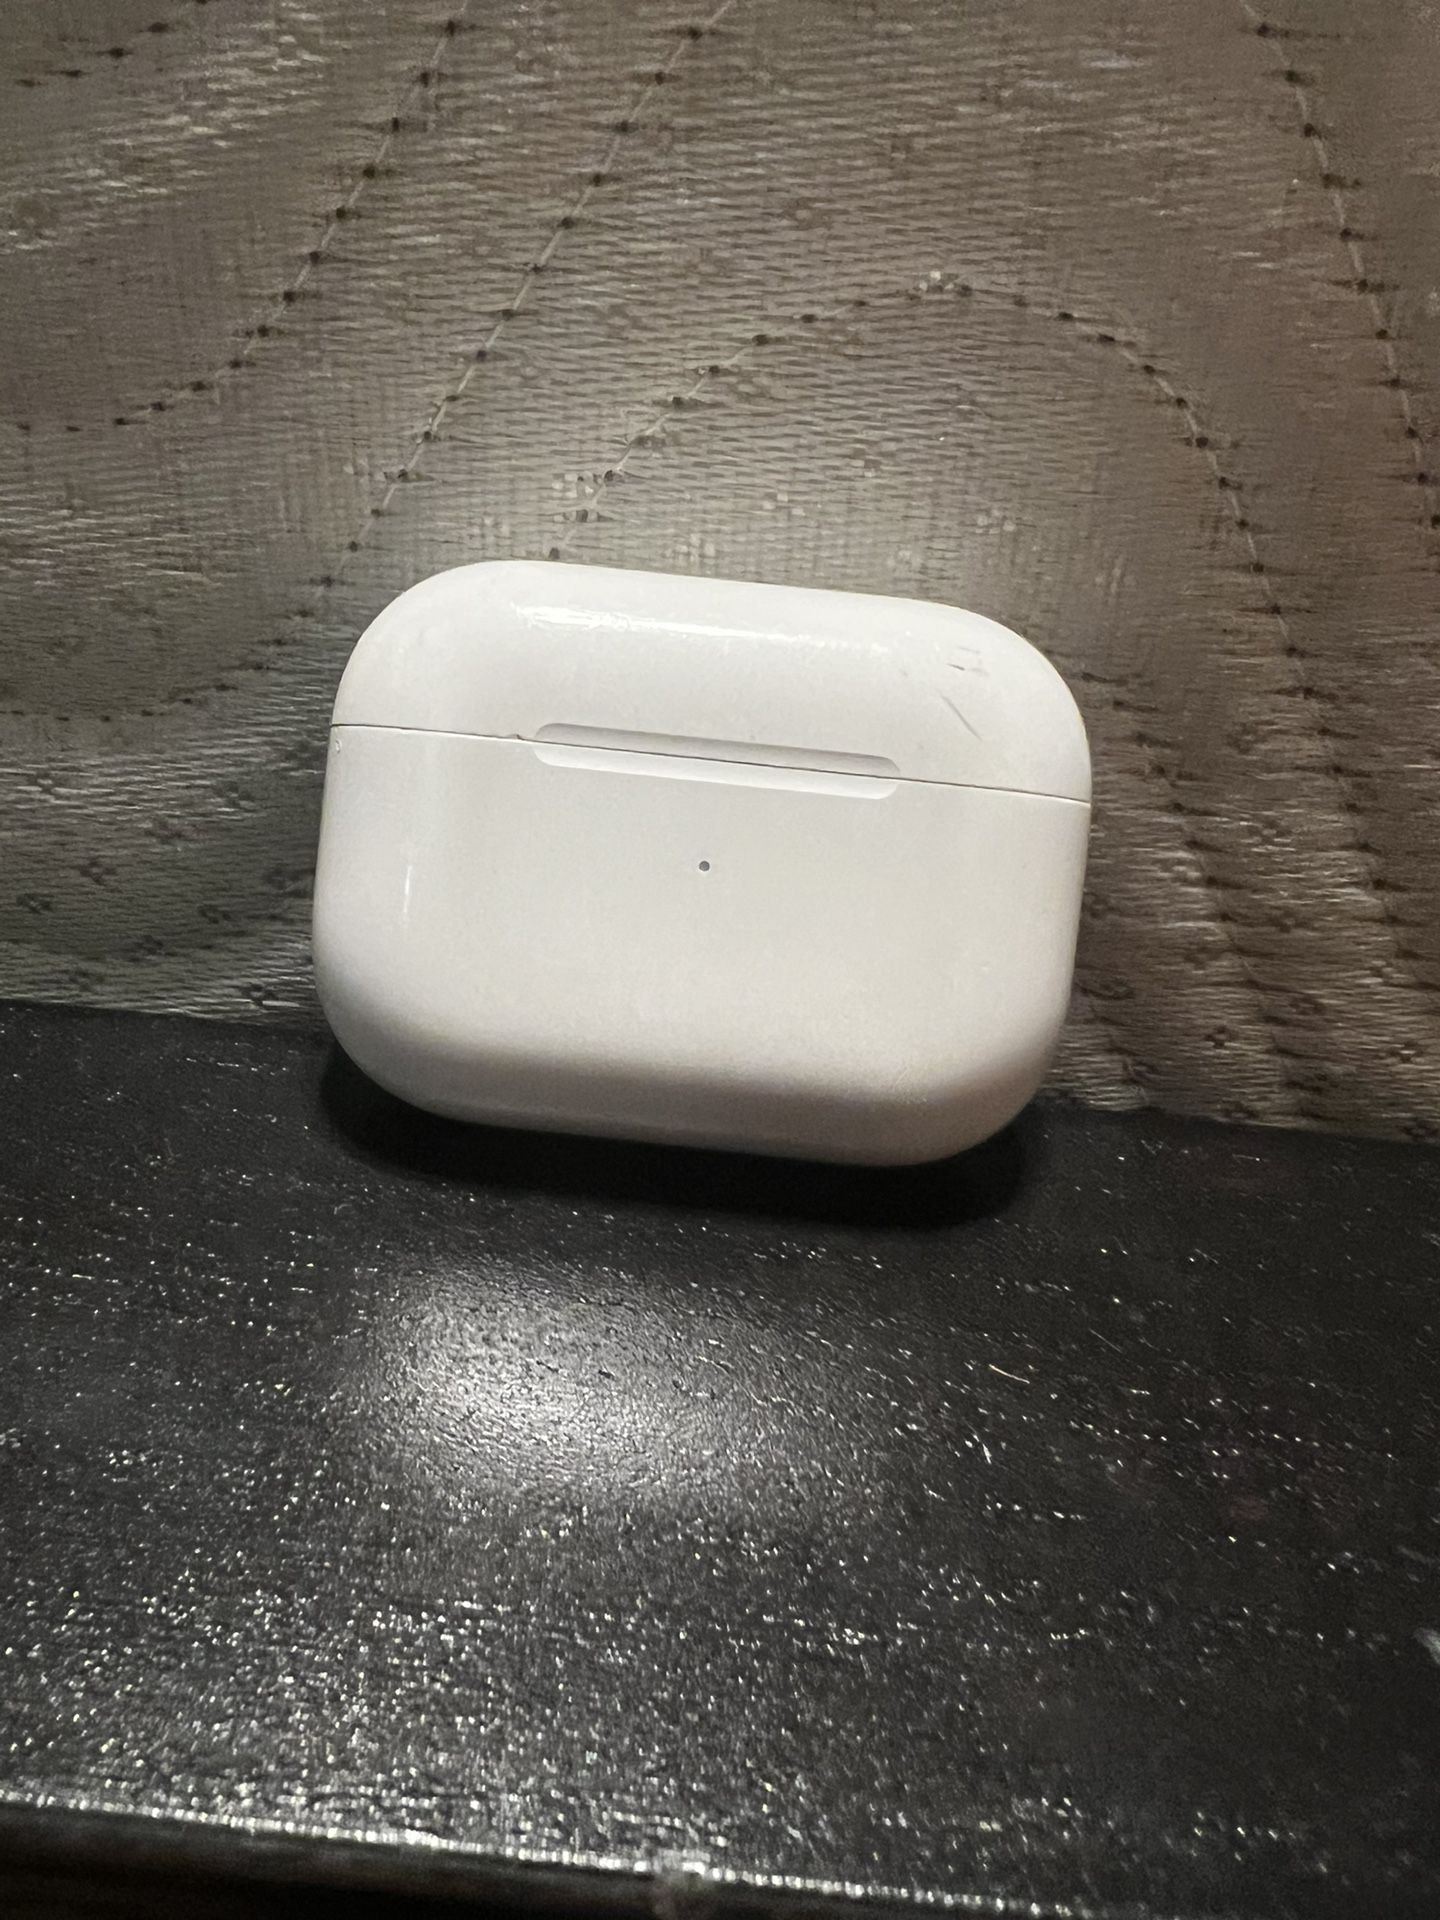 Airpods Pro Gen 2 (Standard Apple Charger)